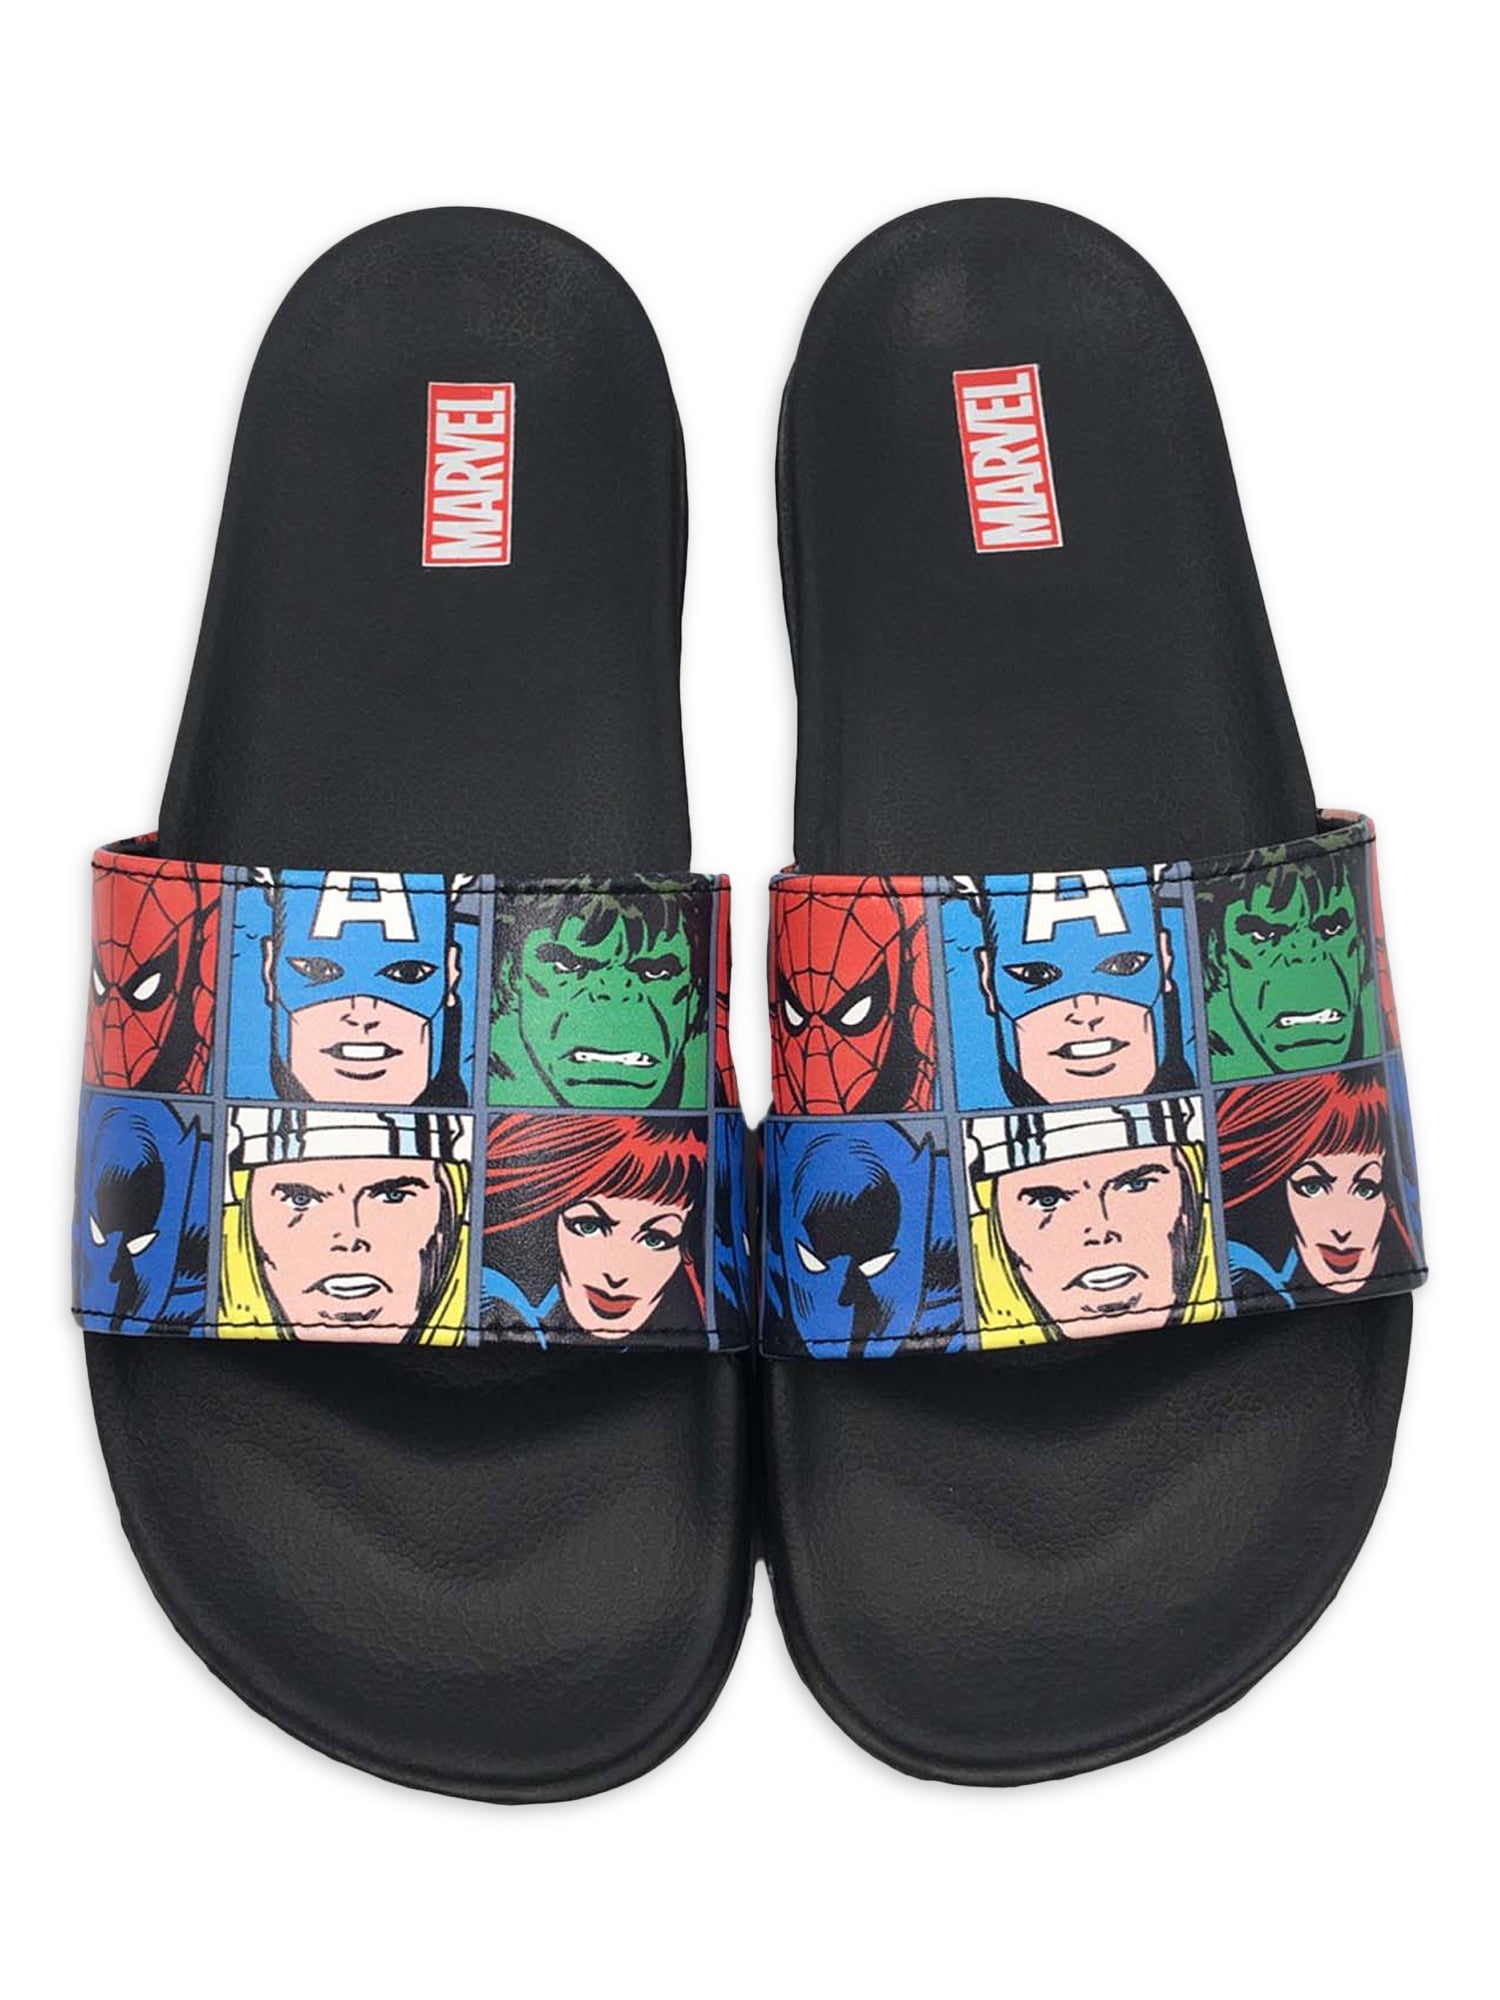 AVENGERS Captain America Mens Flip Flops M Size 9-10 New with tags 